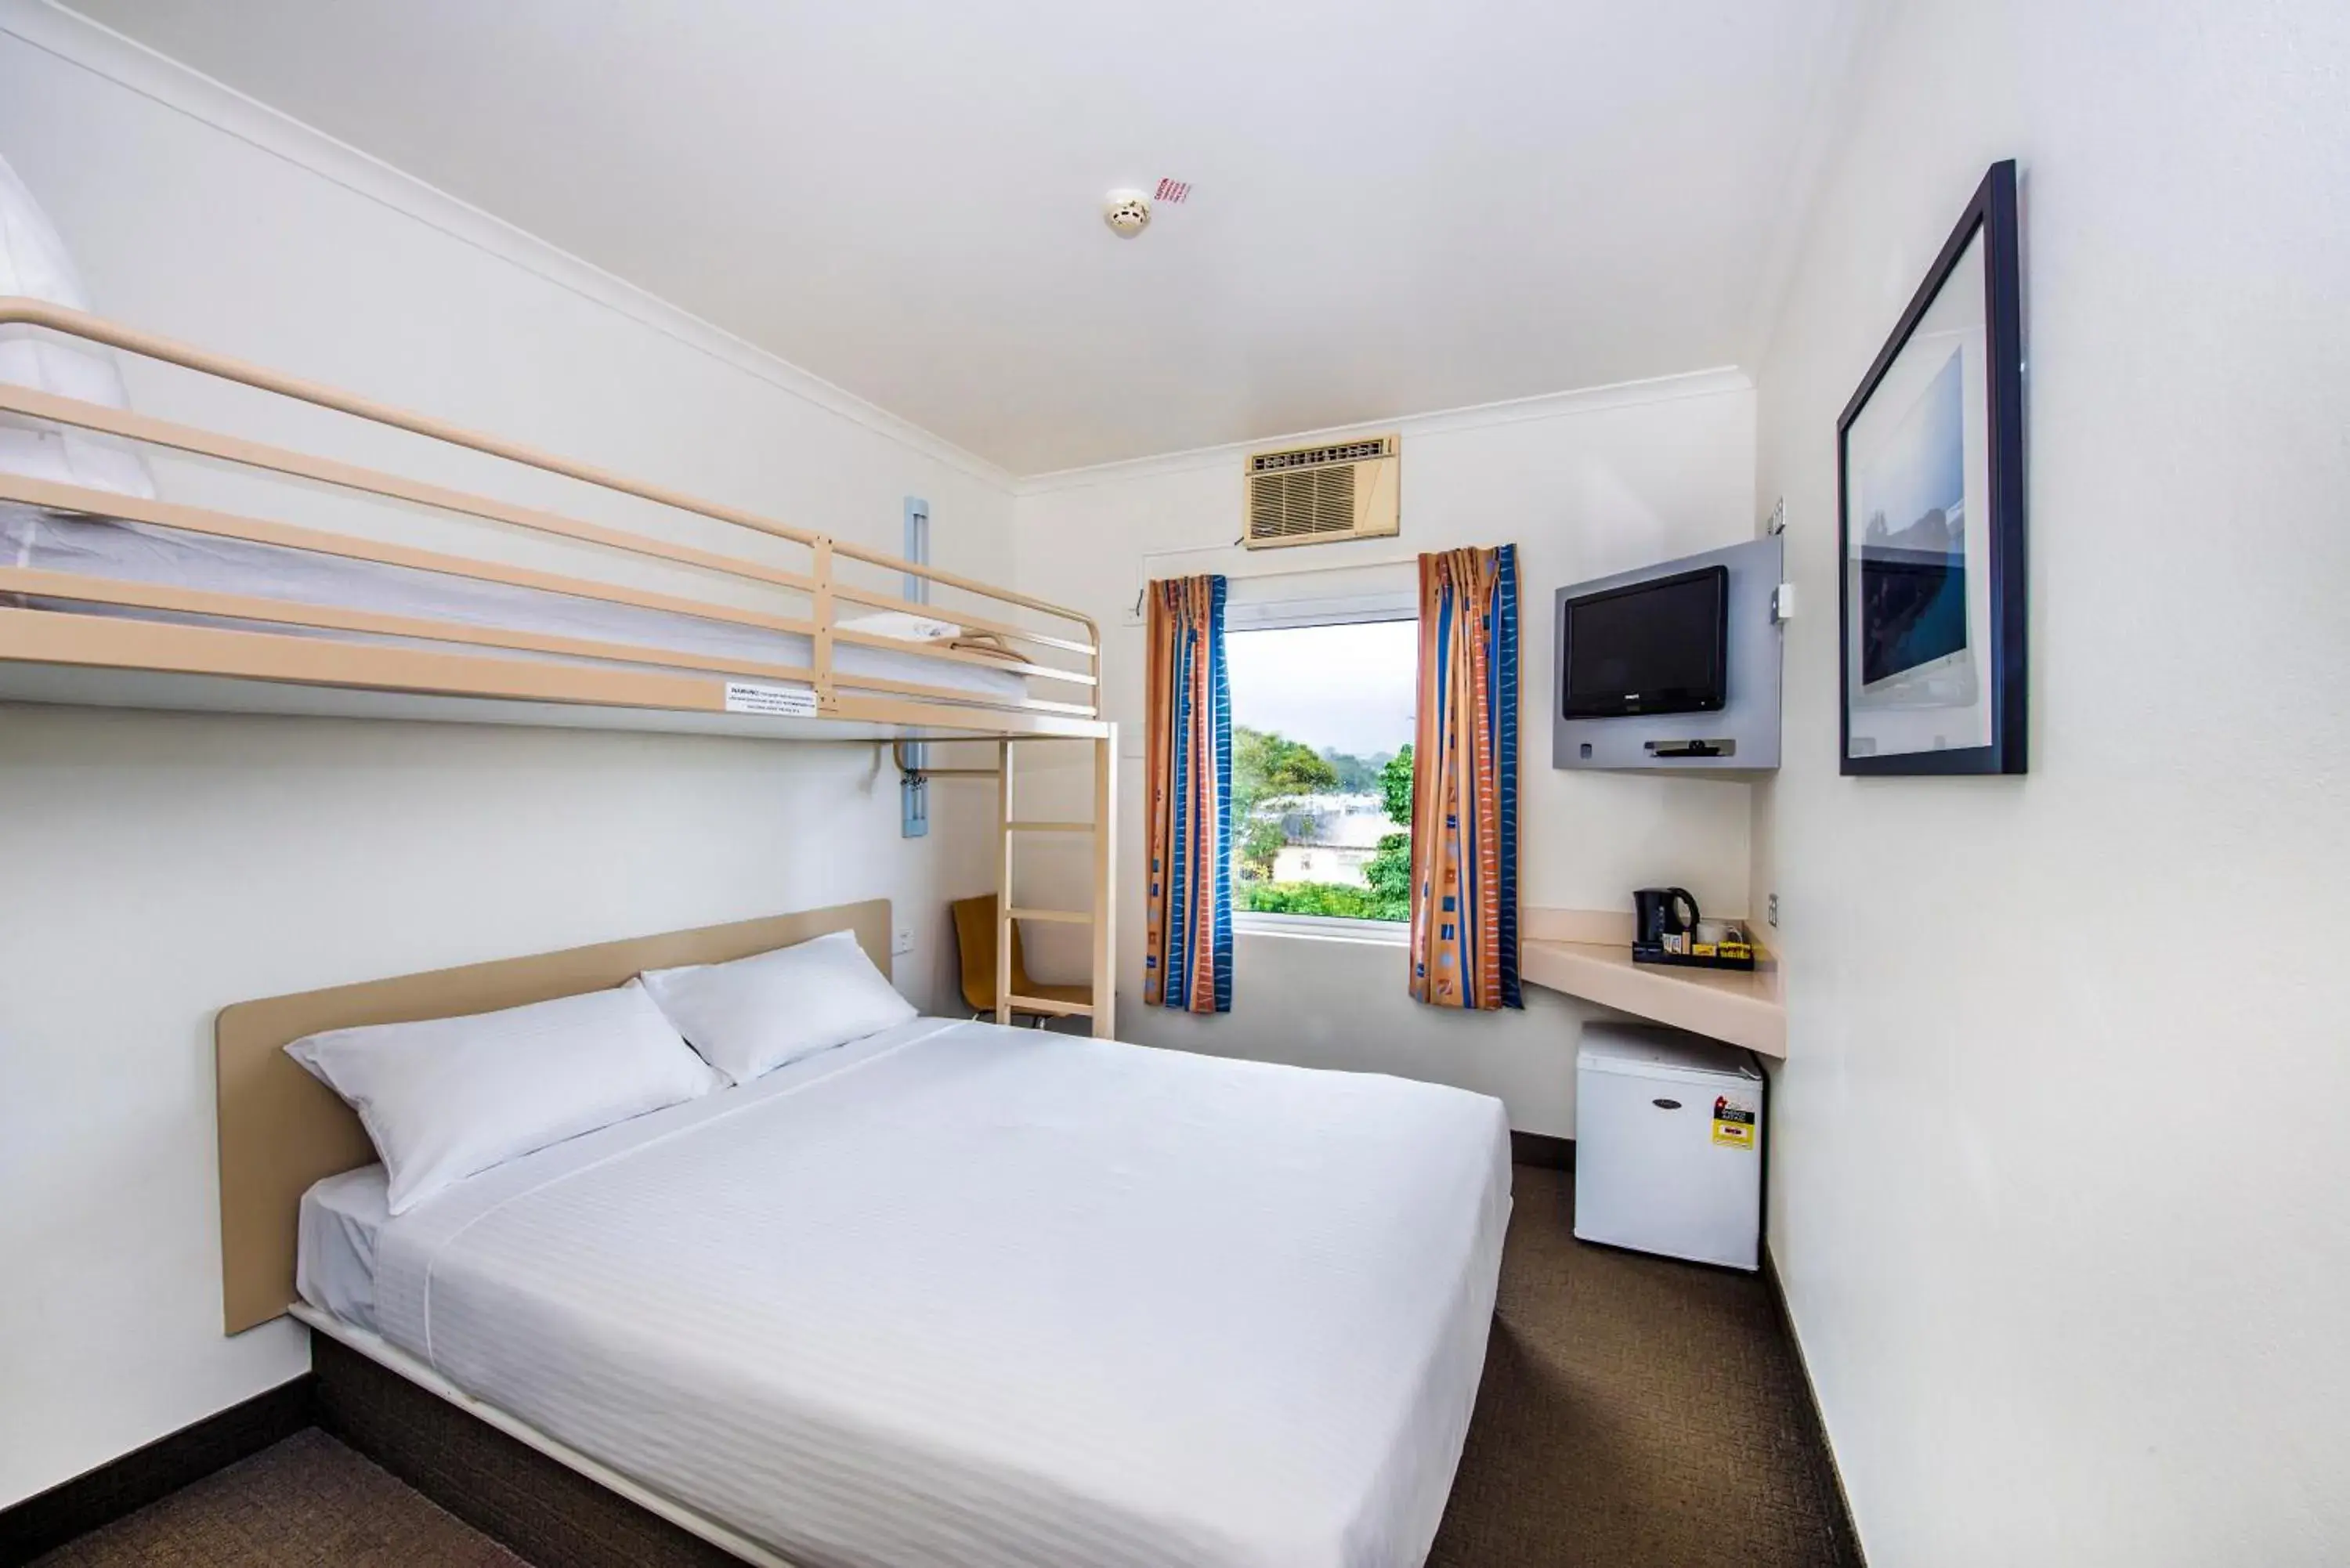 TV and multimedia, Room Photo in ibis Budget Coffs Harbour